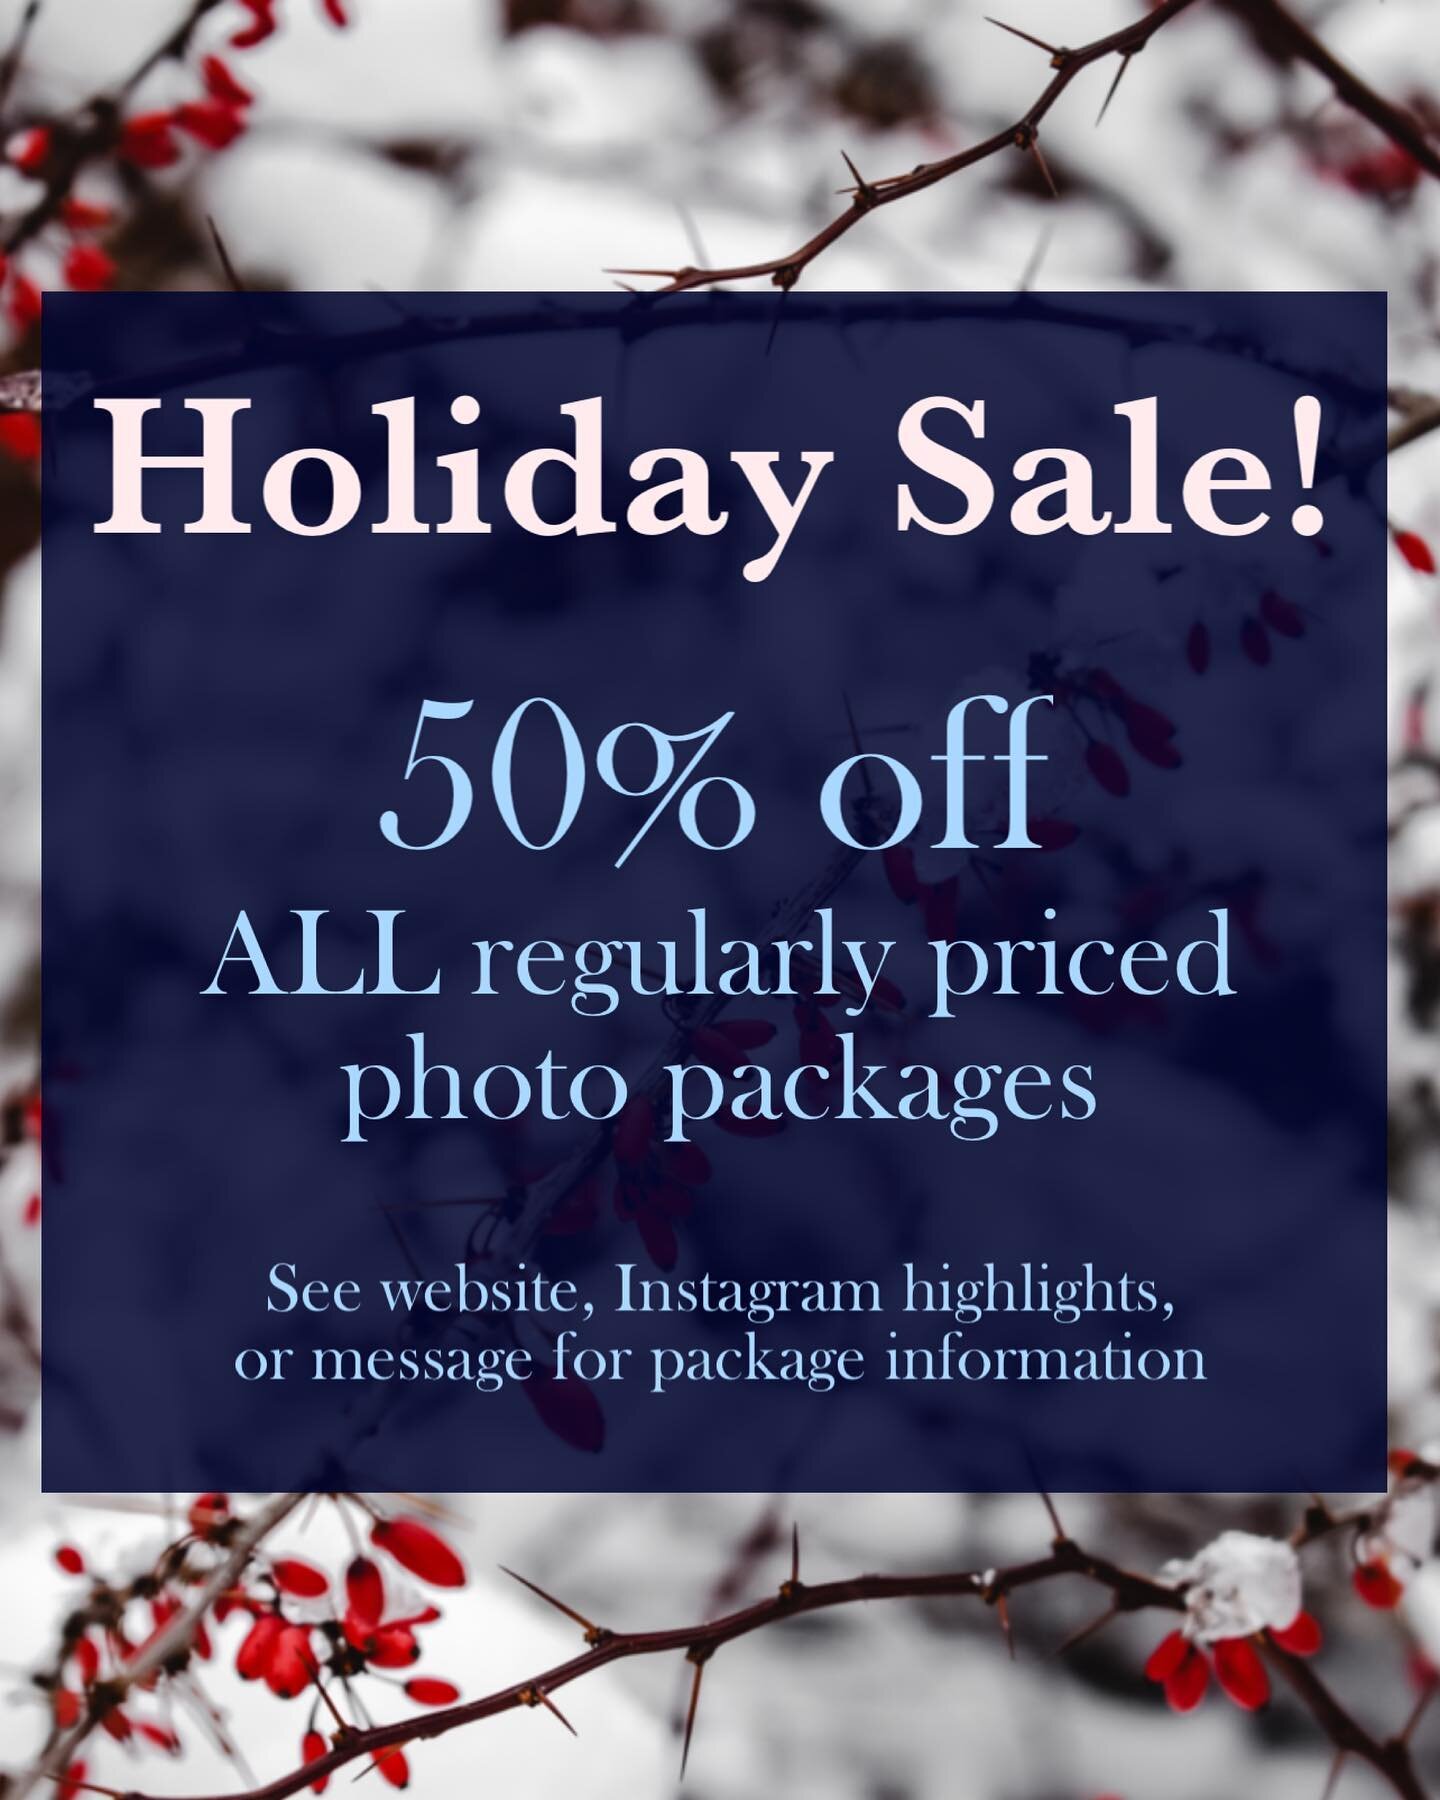 This offer will be running until Christmas so book your sessions now! First 5 people to book a shoot will also get a complimentary 8x10 framed print 💛
.
.
.
.
#holidaysale #holidaydiscounts #photography #photoshoot #mainephotographer